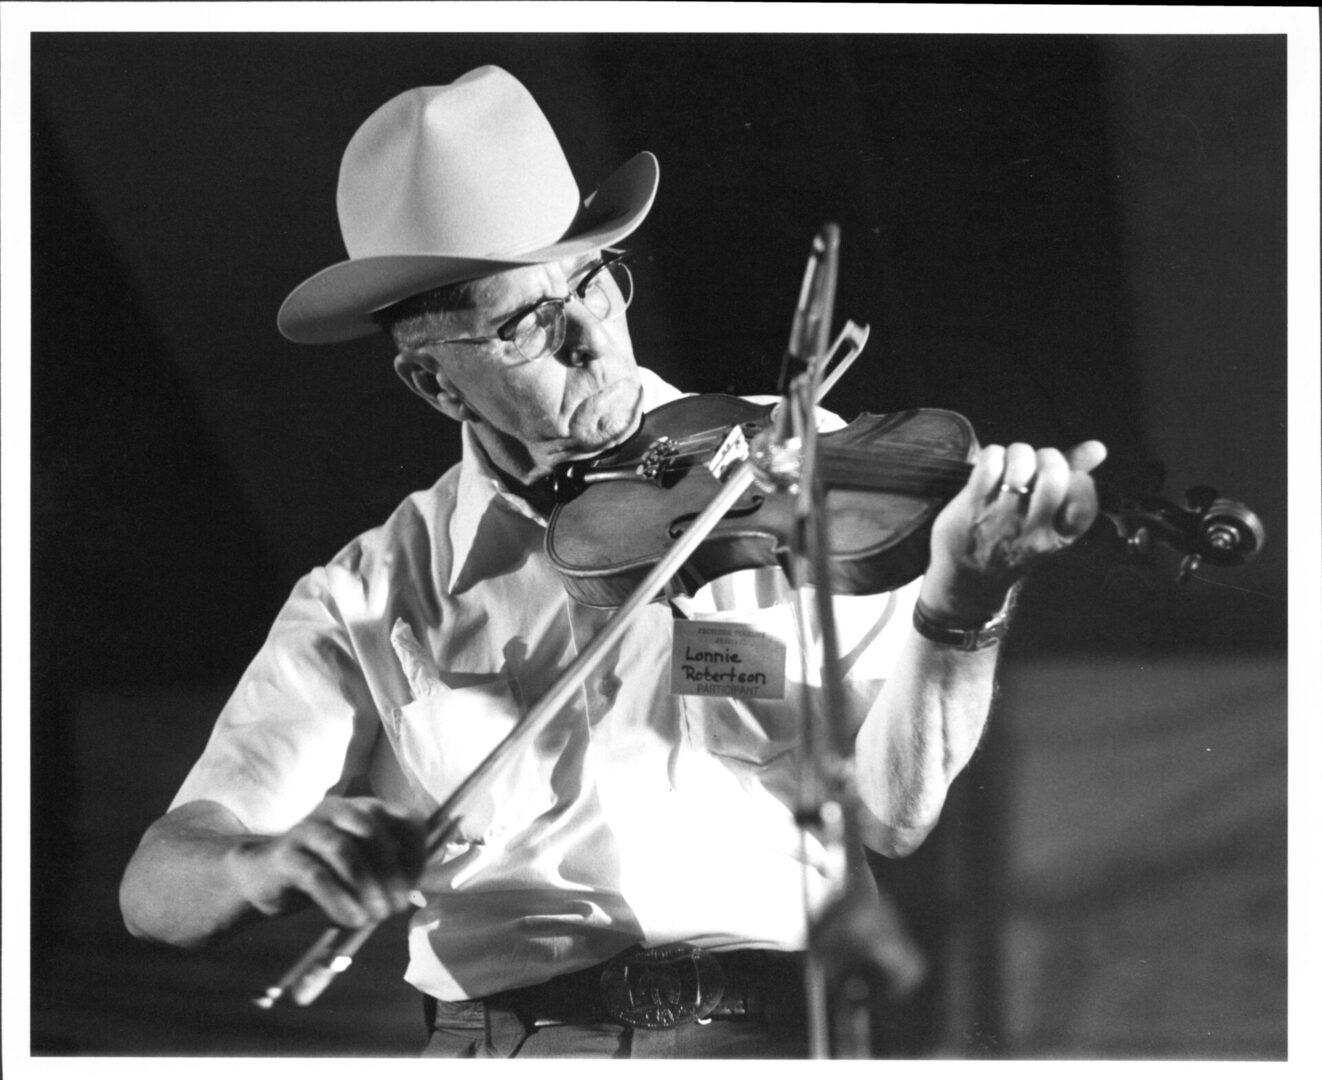 A man playing the violin in front of an audience.